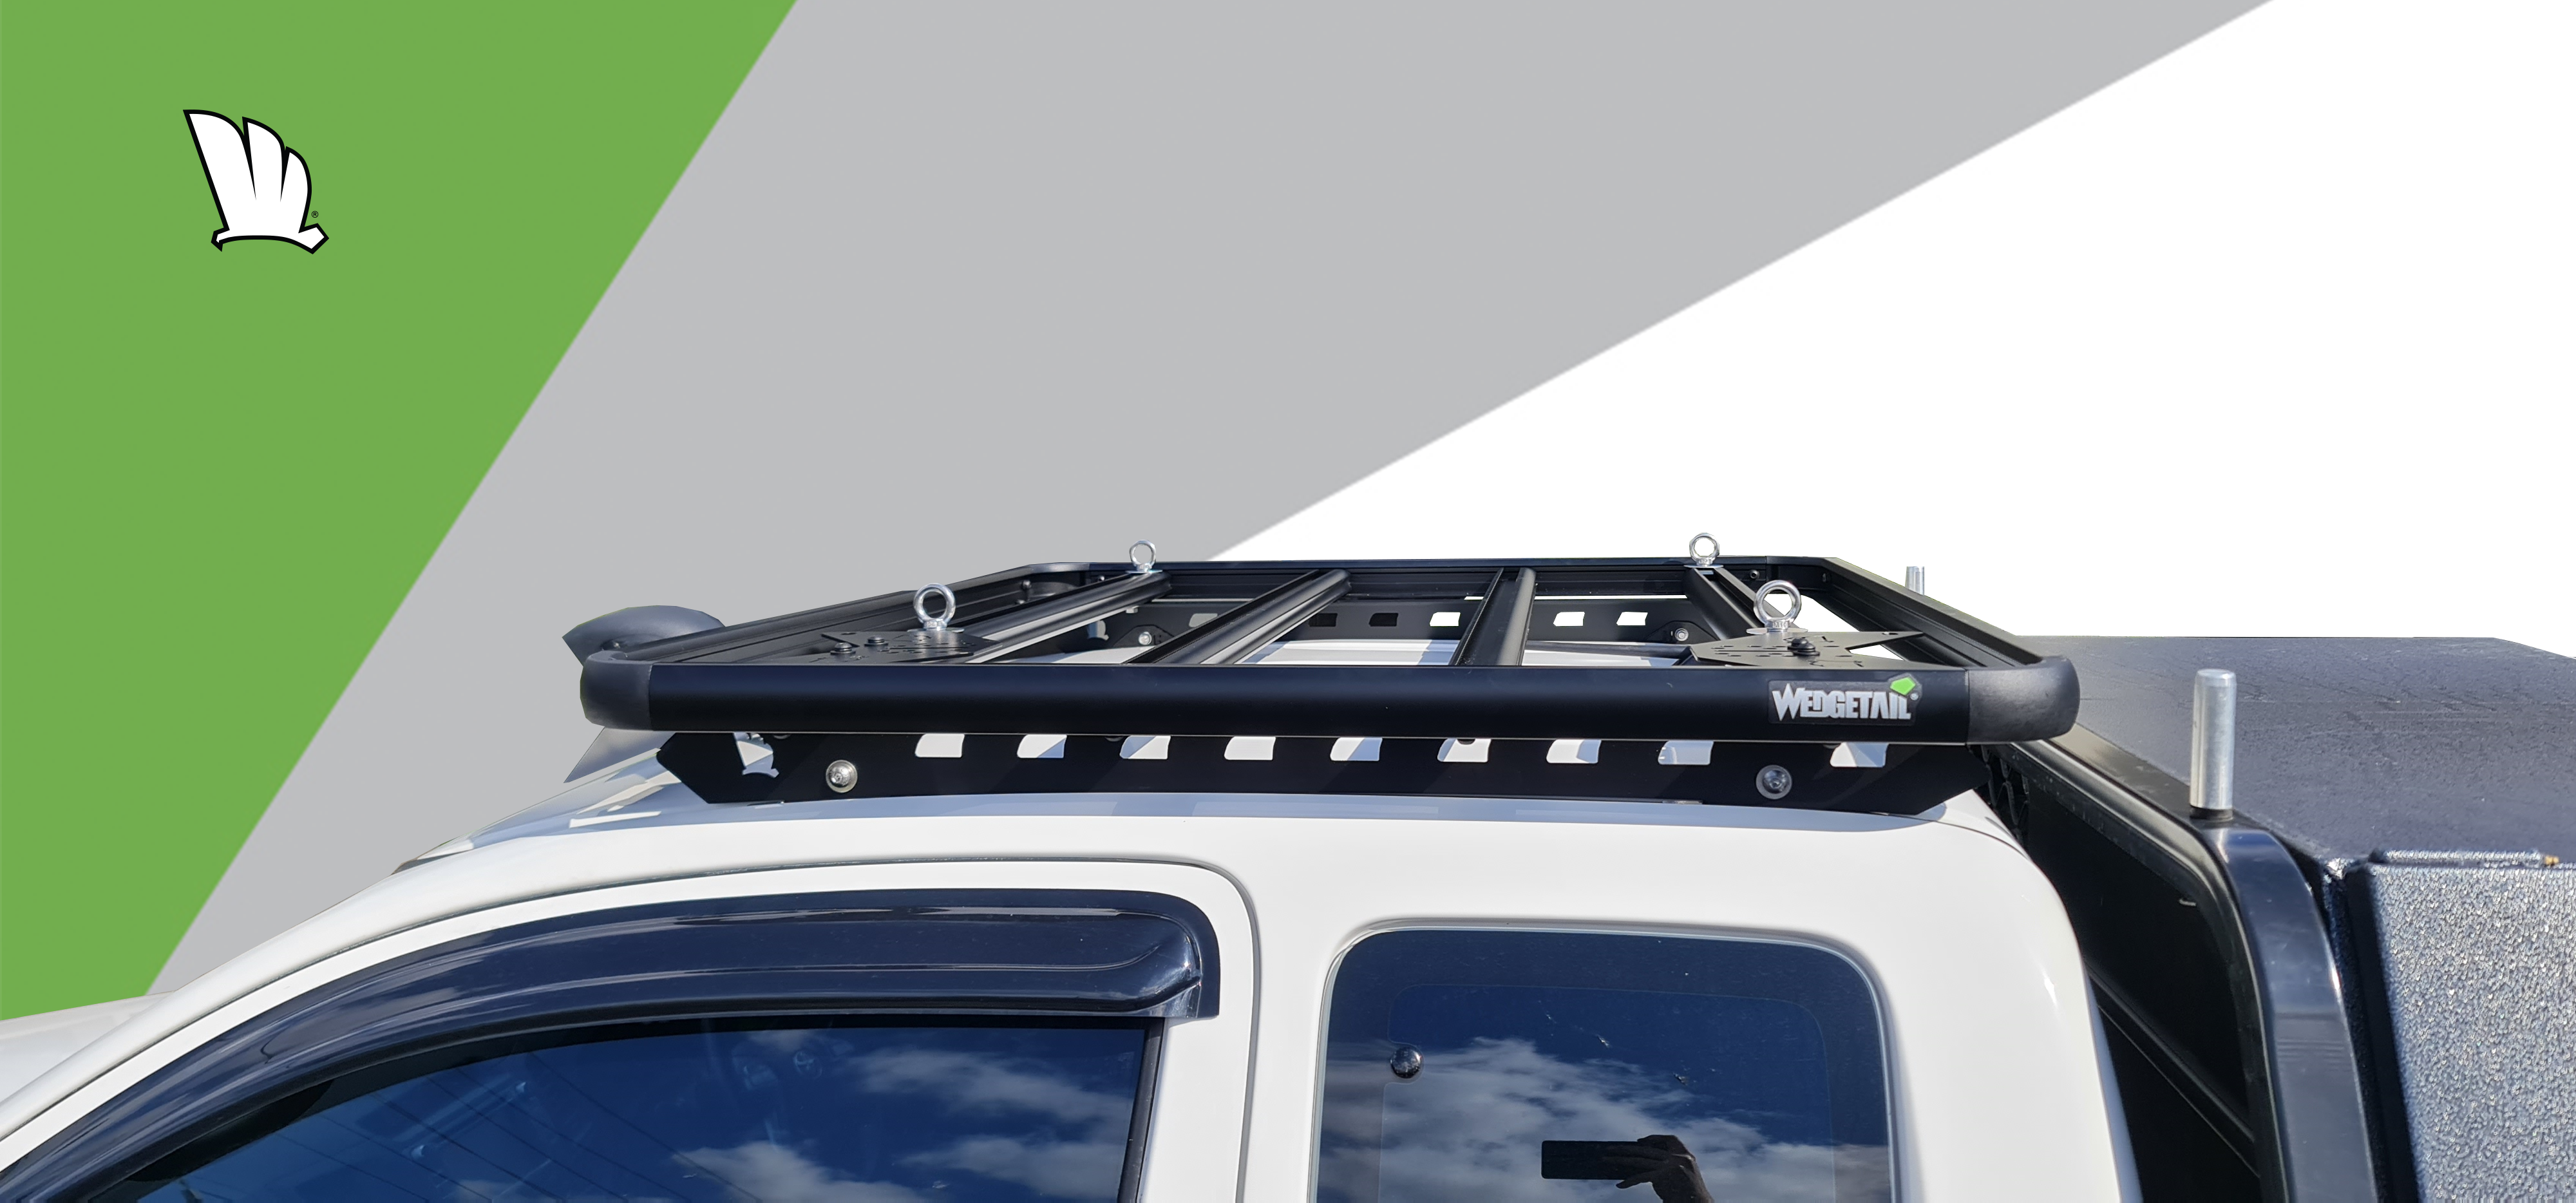 Wedgetail platform roof rack installed on the roof of the dual cab and has the wind deflector mounted on the front and one-piece steel mounting rails that are fixed to mounting lugs that are bolted into the roof sub-structure.